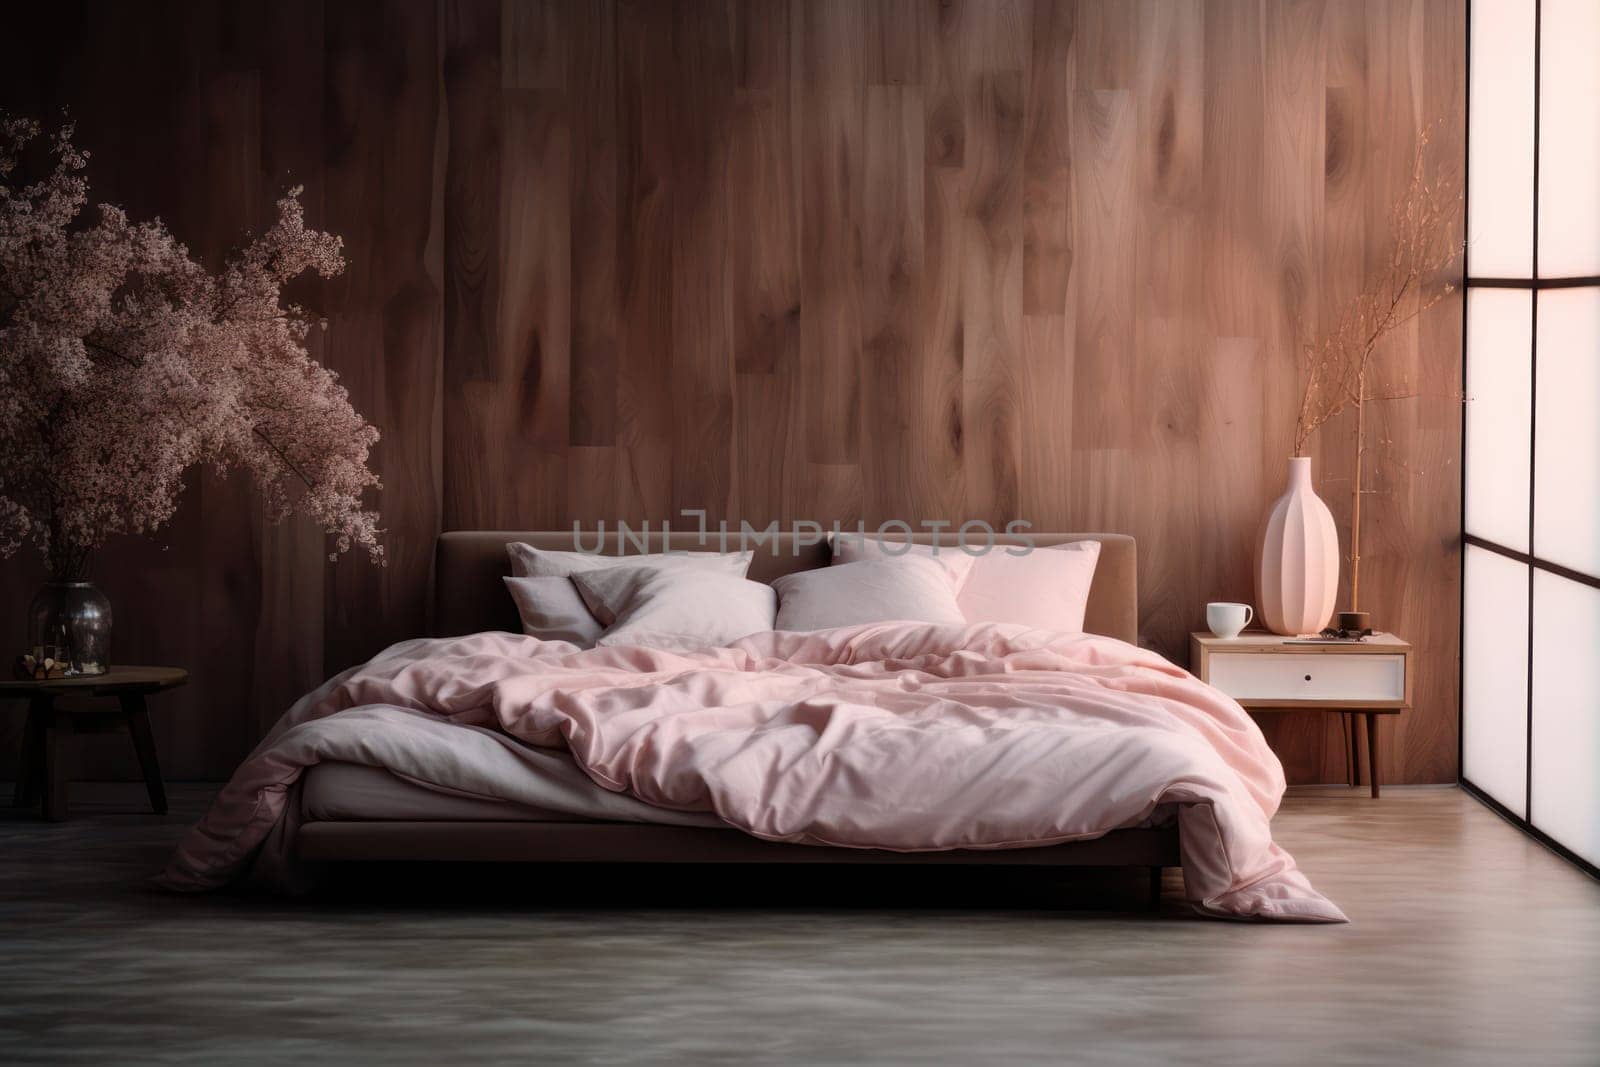 Modern Design: Cozy Bedroom with Stylish Furniture and Elegant Wood Wall Decor by Vichizh